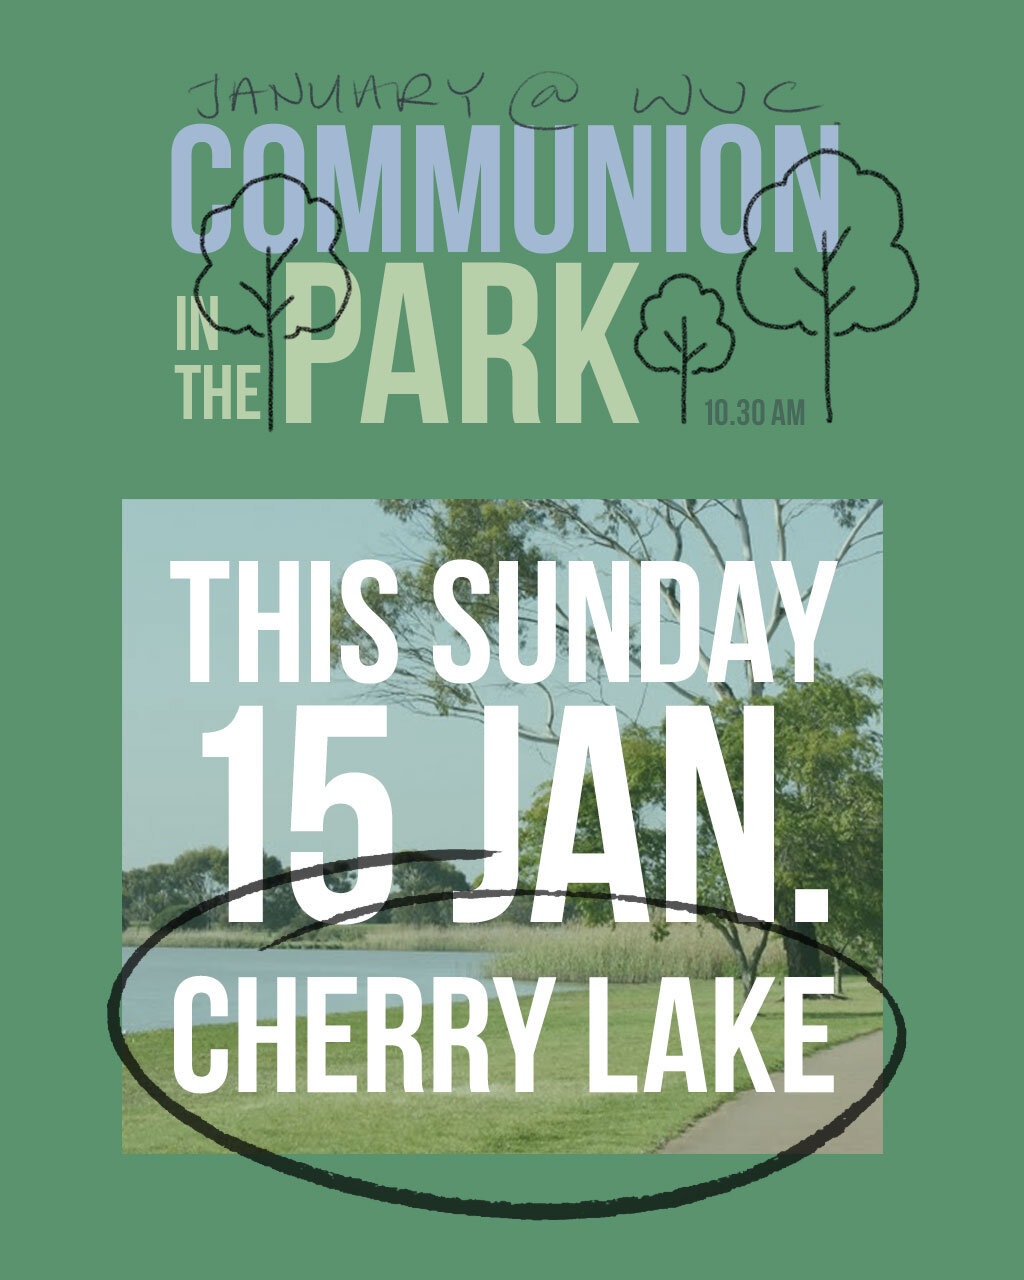 Grab your picnic basket and meet us at Cherry Lake for Communion in the Park. This Sunday, 10.30 am. BYO snacks. No Service at Champion Rd. More info: www.wvc.org.au/park